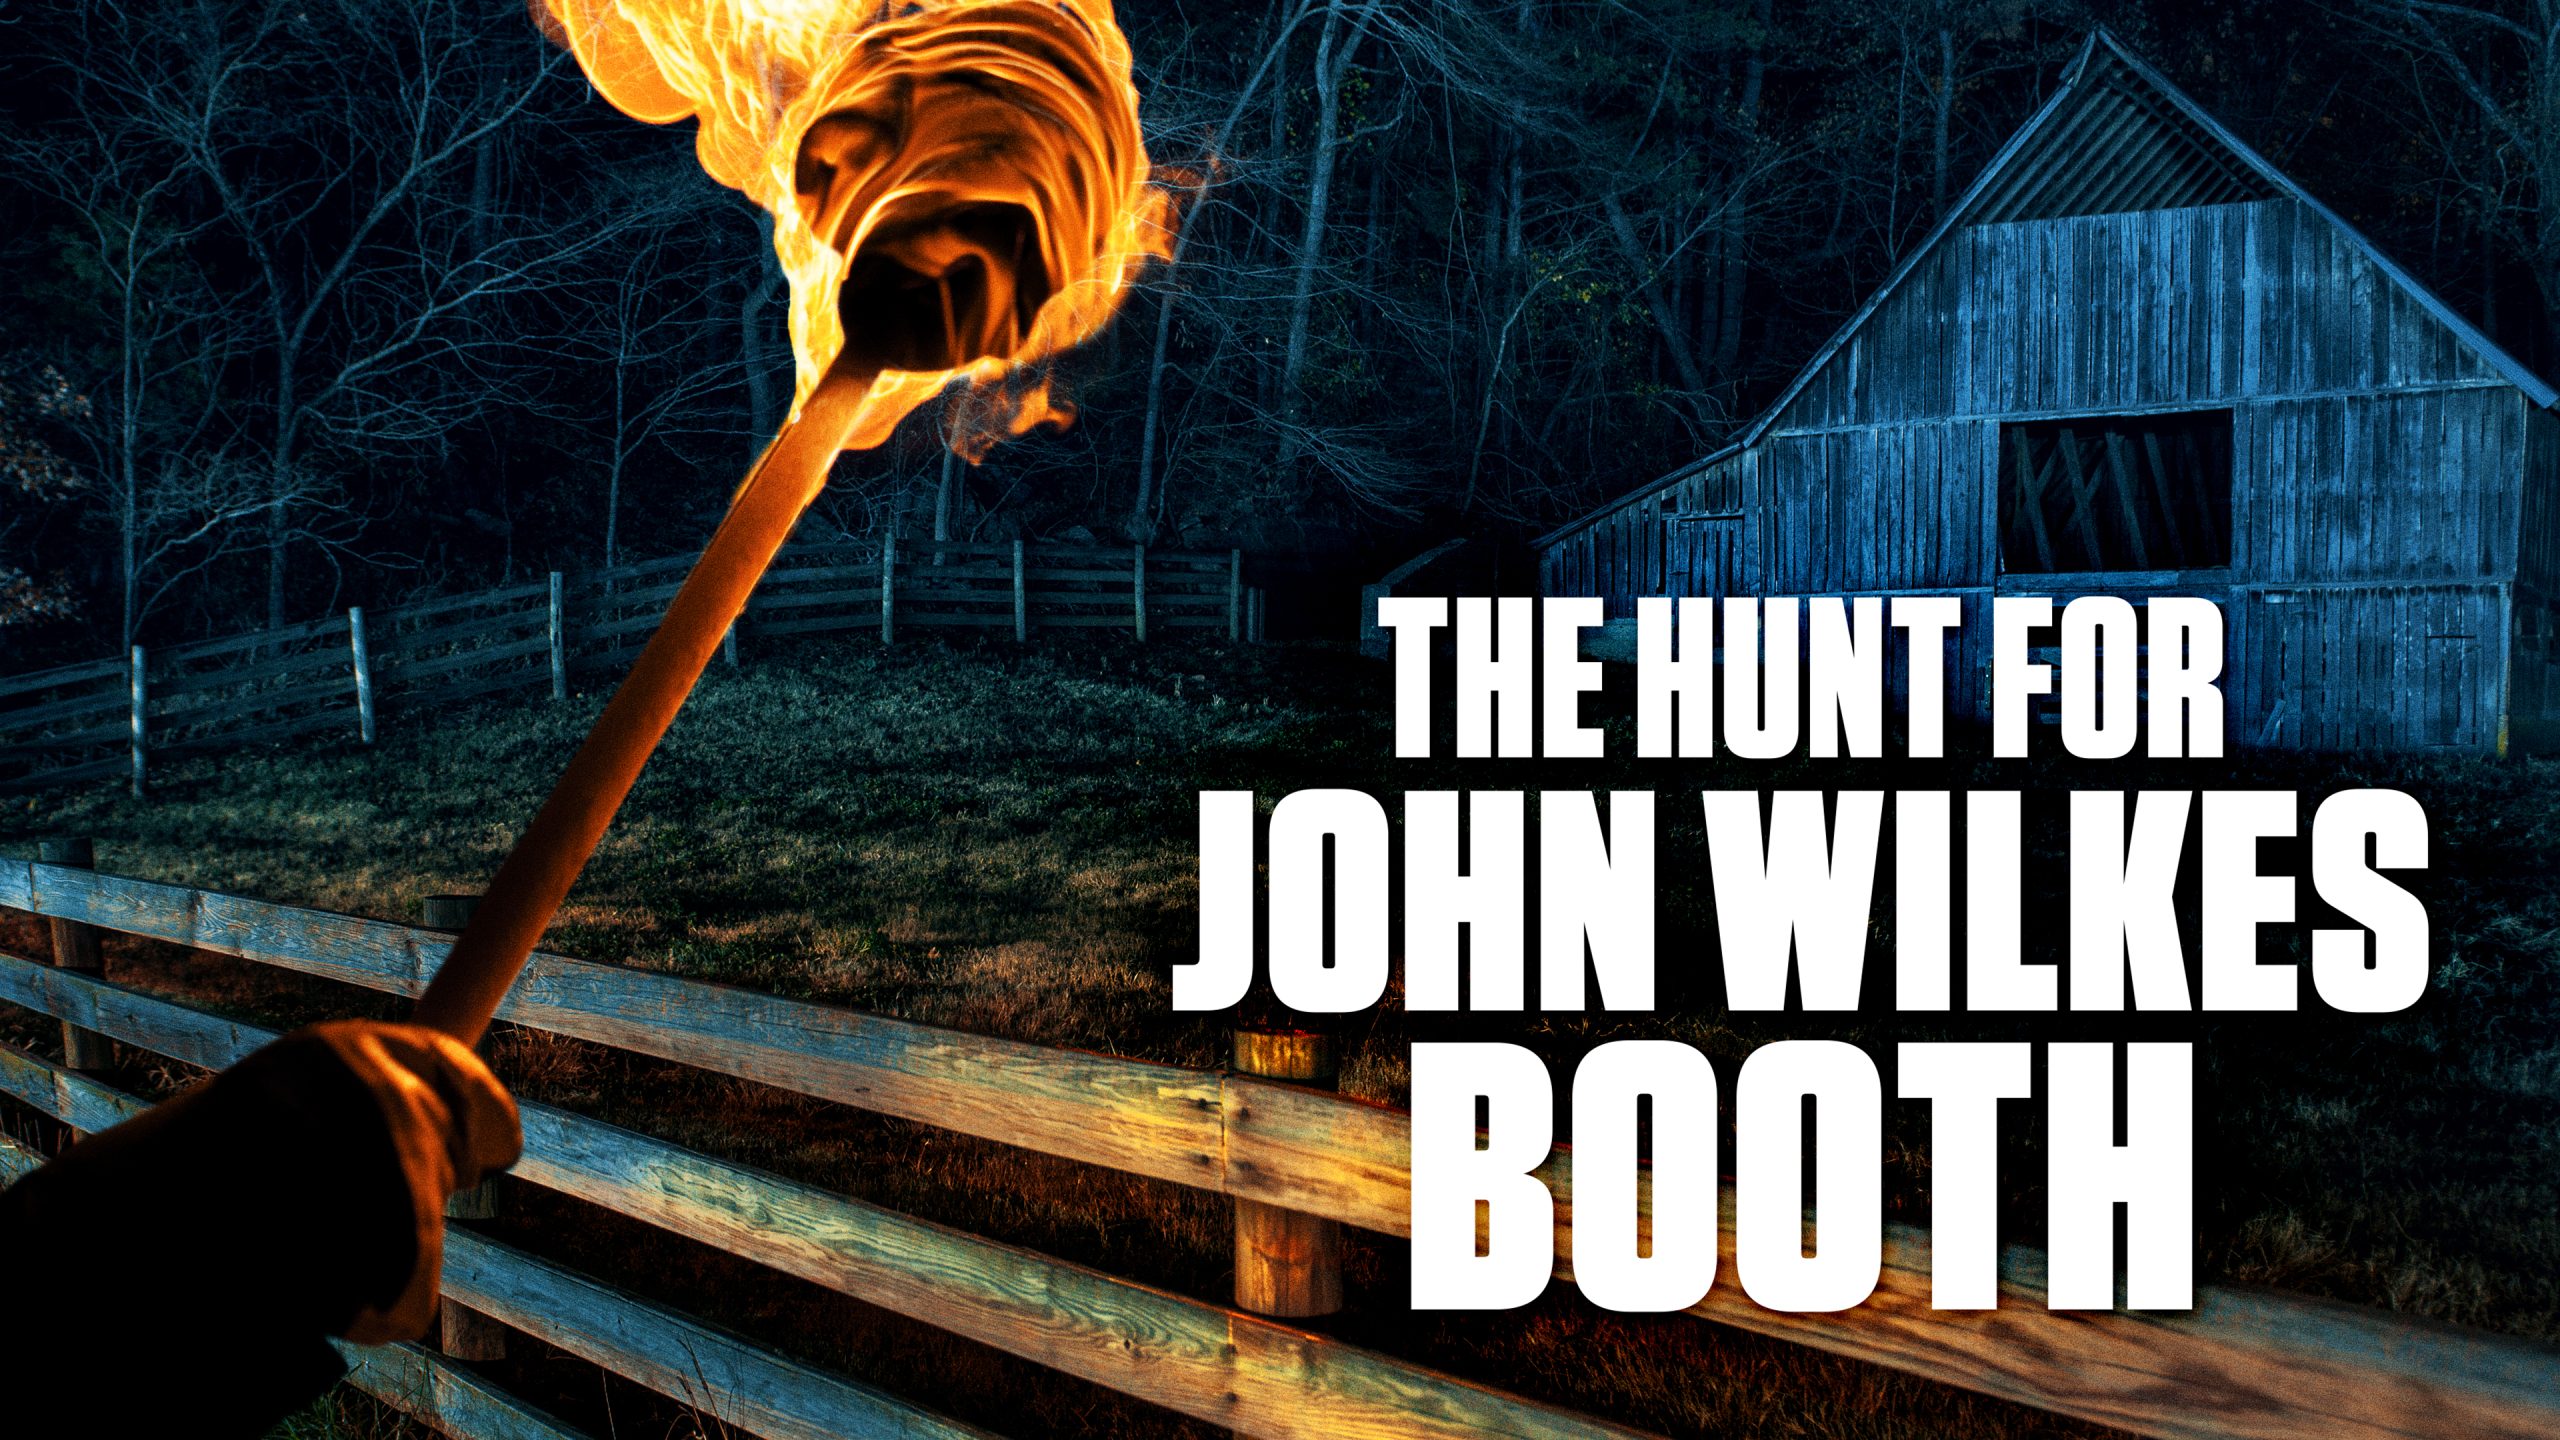 Watch 'The Hunt for John Wilkes Booth' on HISTORY Vault!